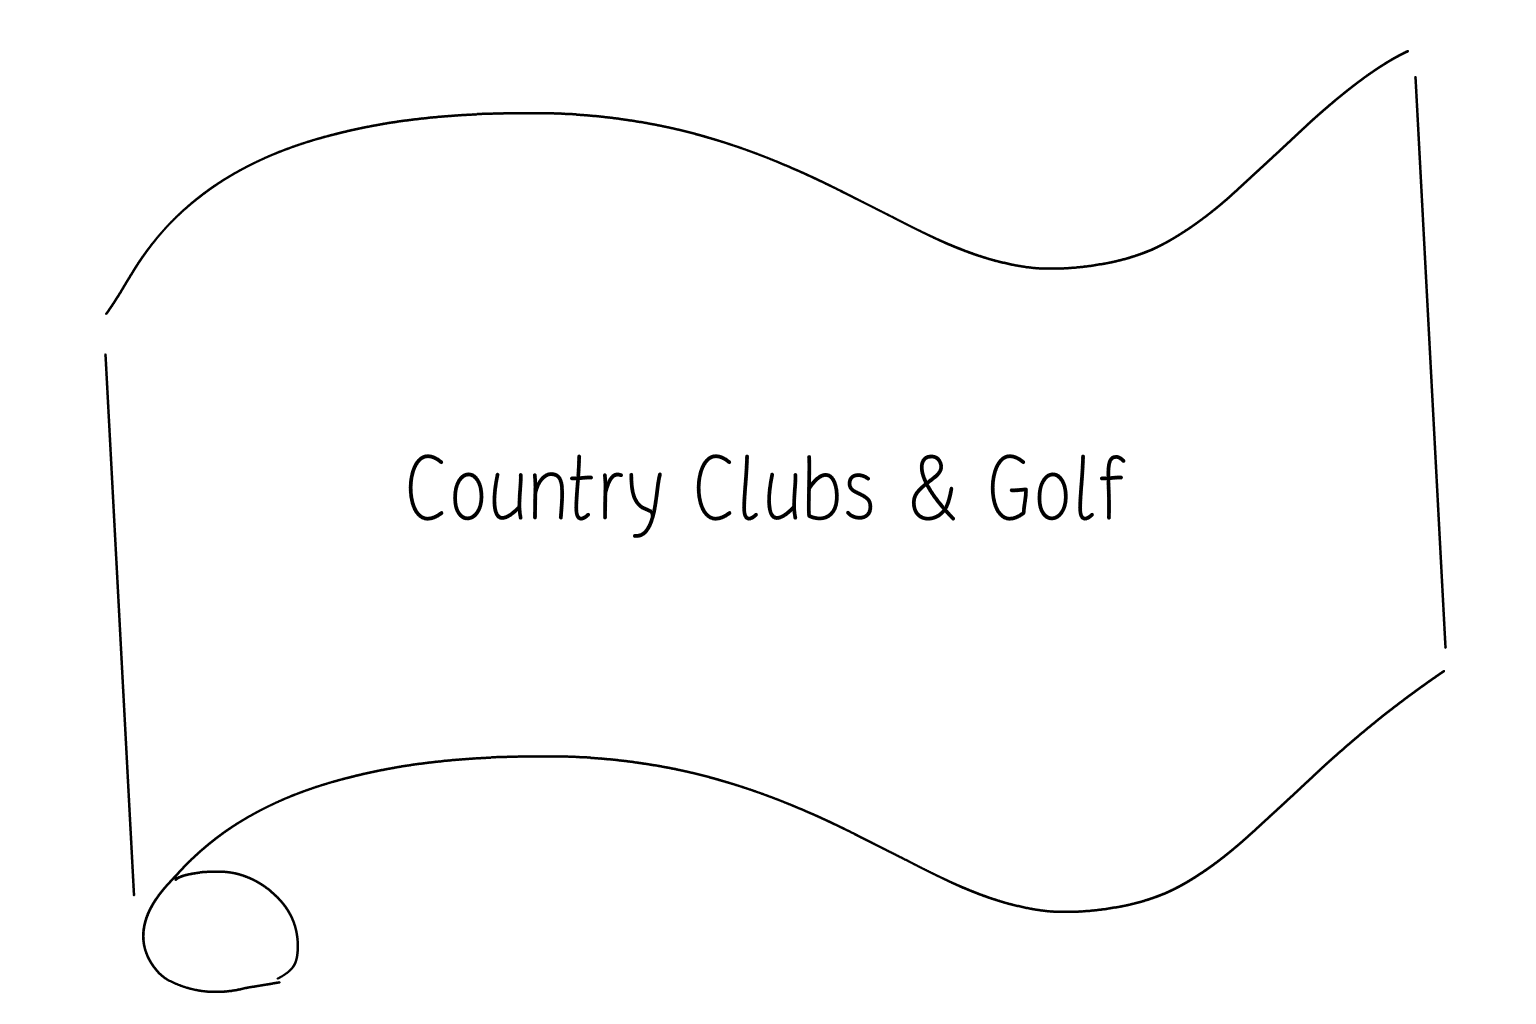 Illustration of Country Clubs & Golf